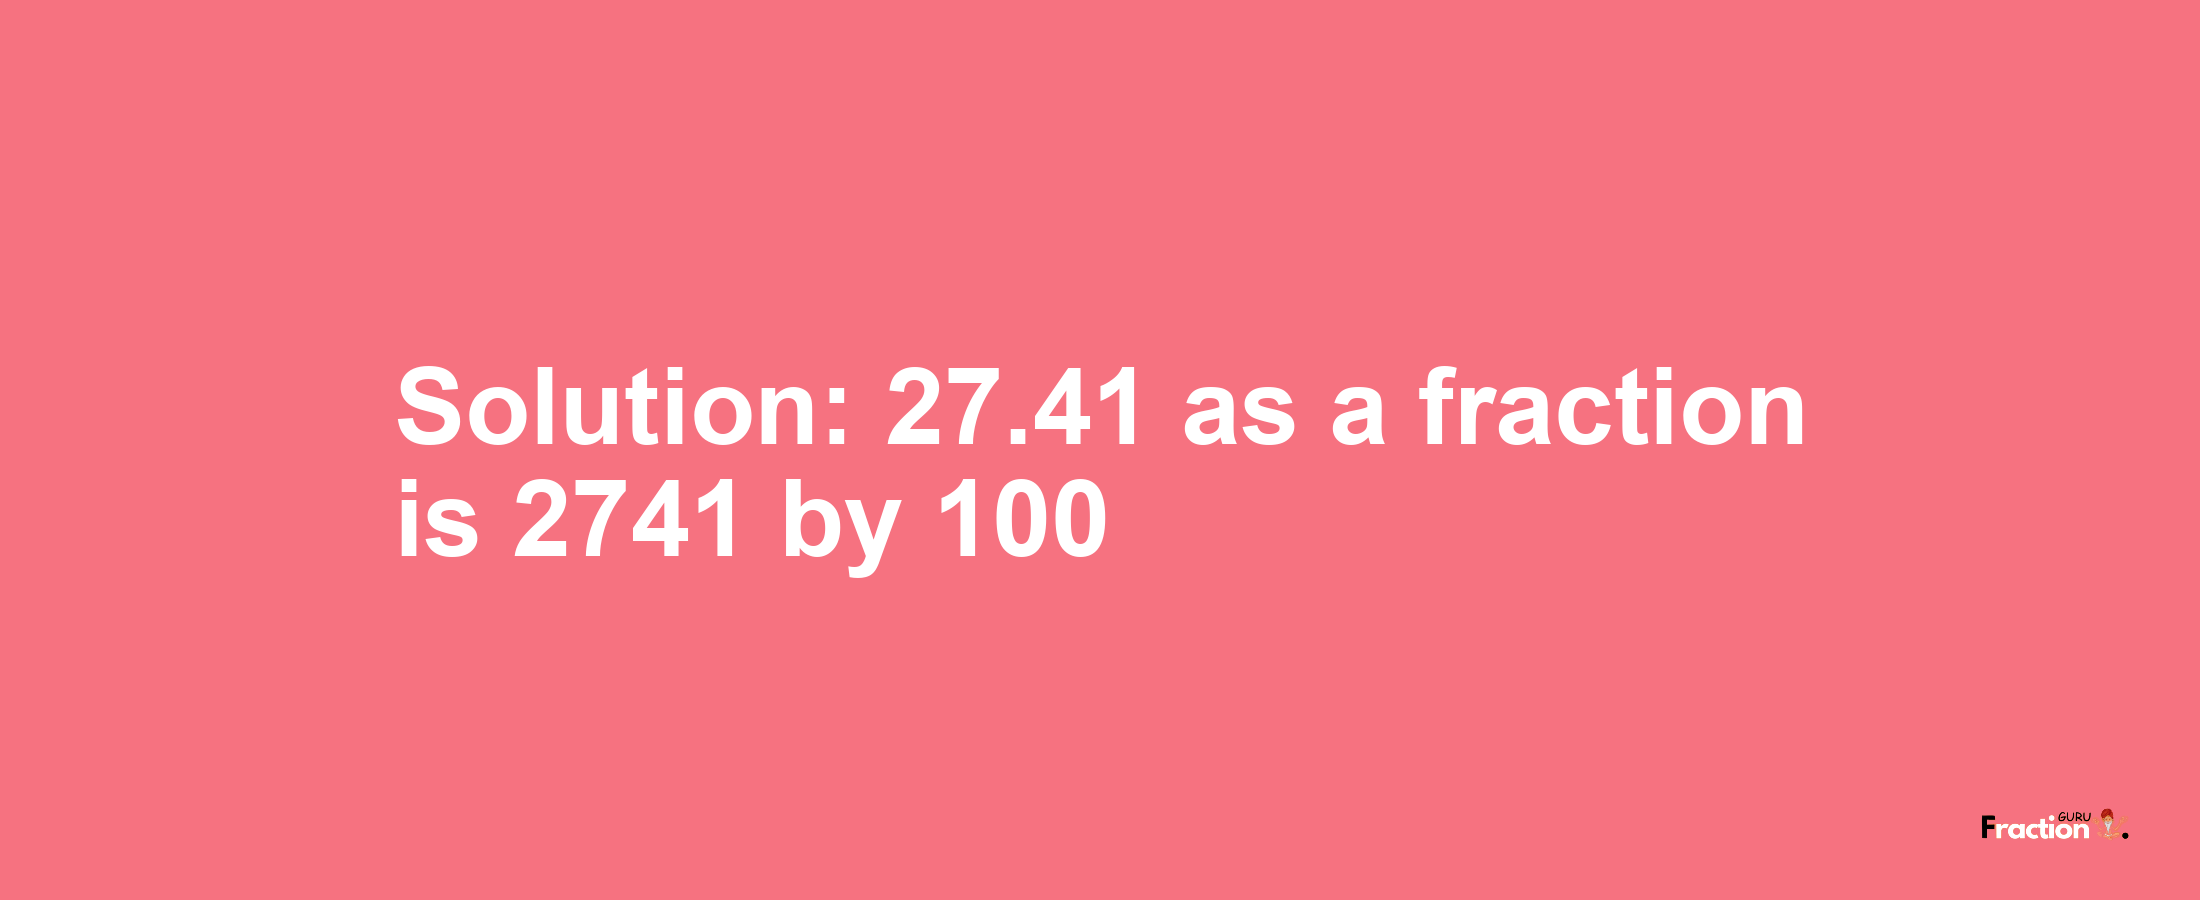 Solution:27.41 as a fraction is 2741/100